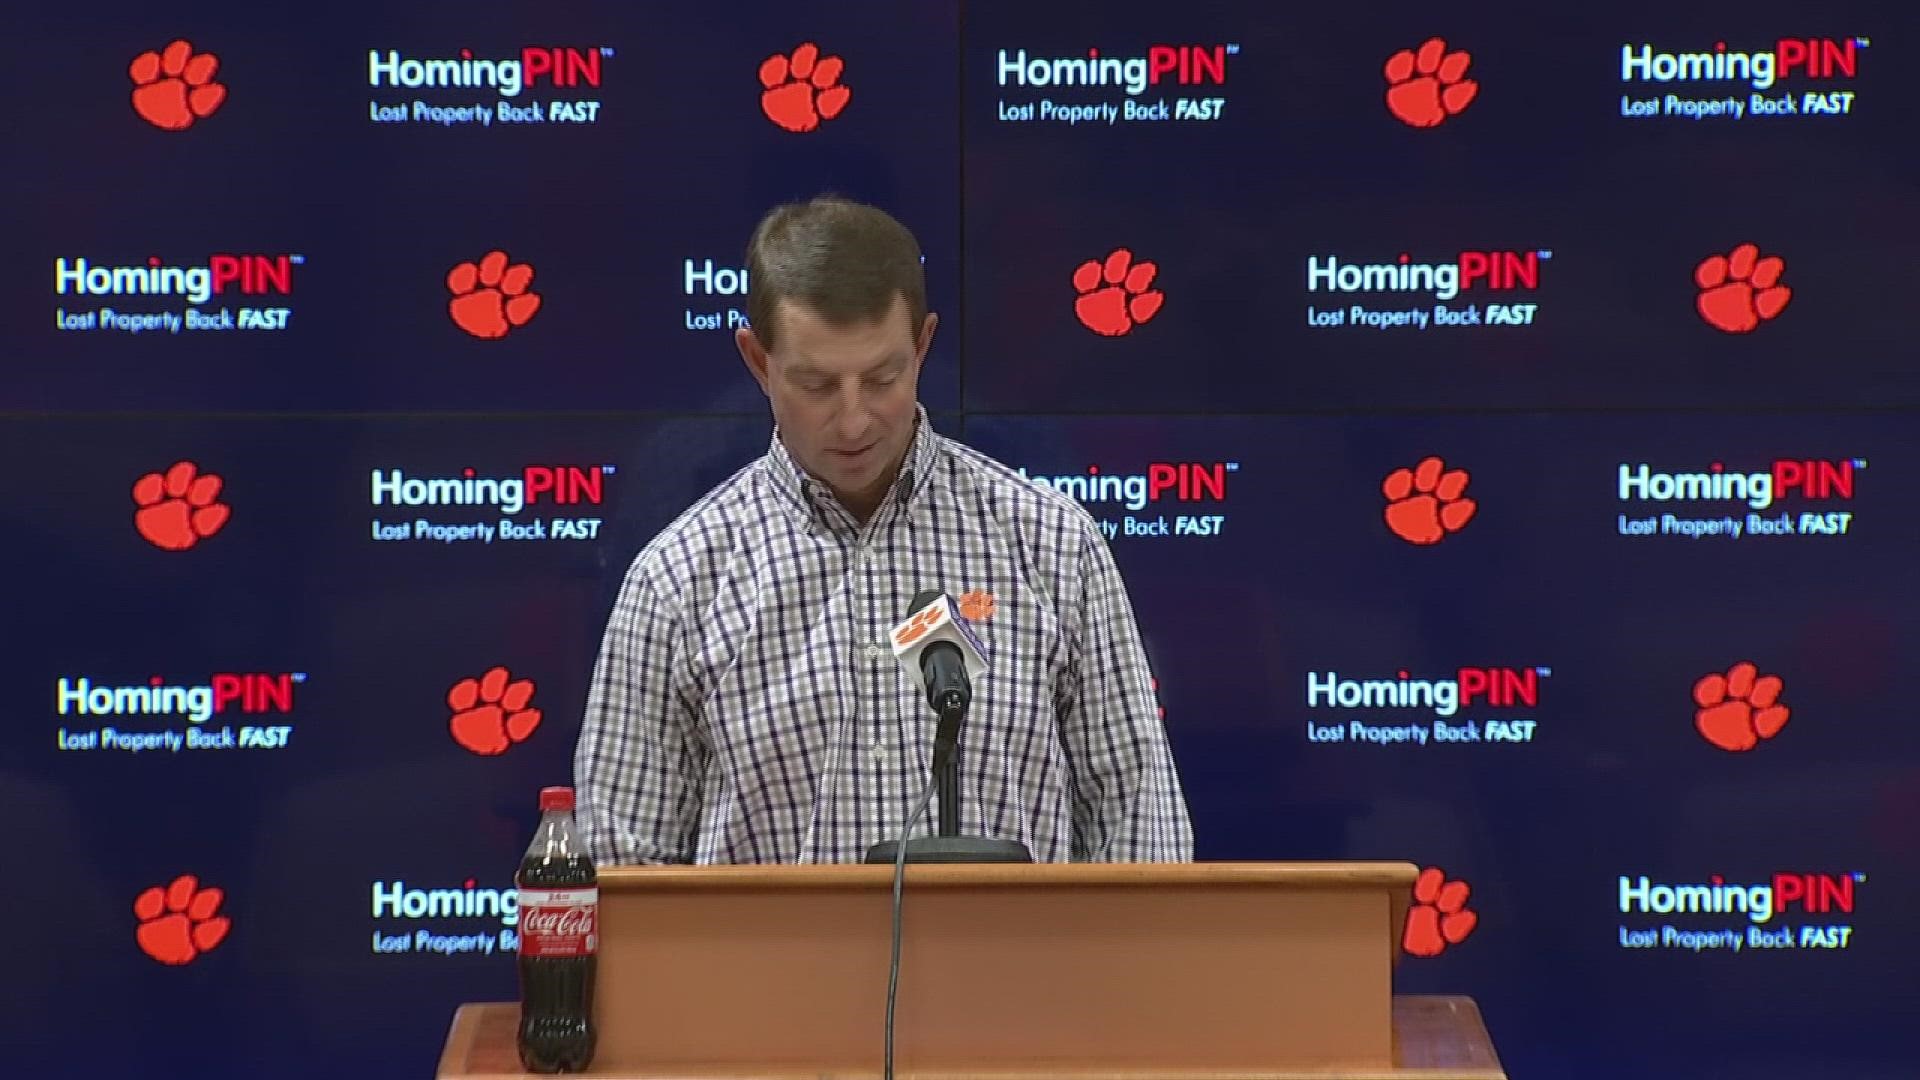 Clemson head football coach Dabo Swinney described in graphic detail his initial reaction after watching last year's game with Florida State.